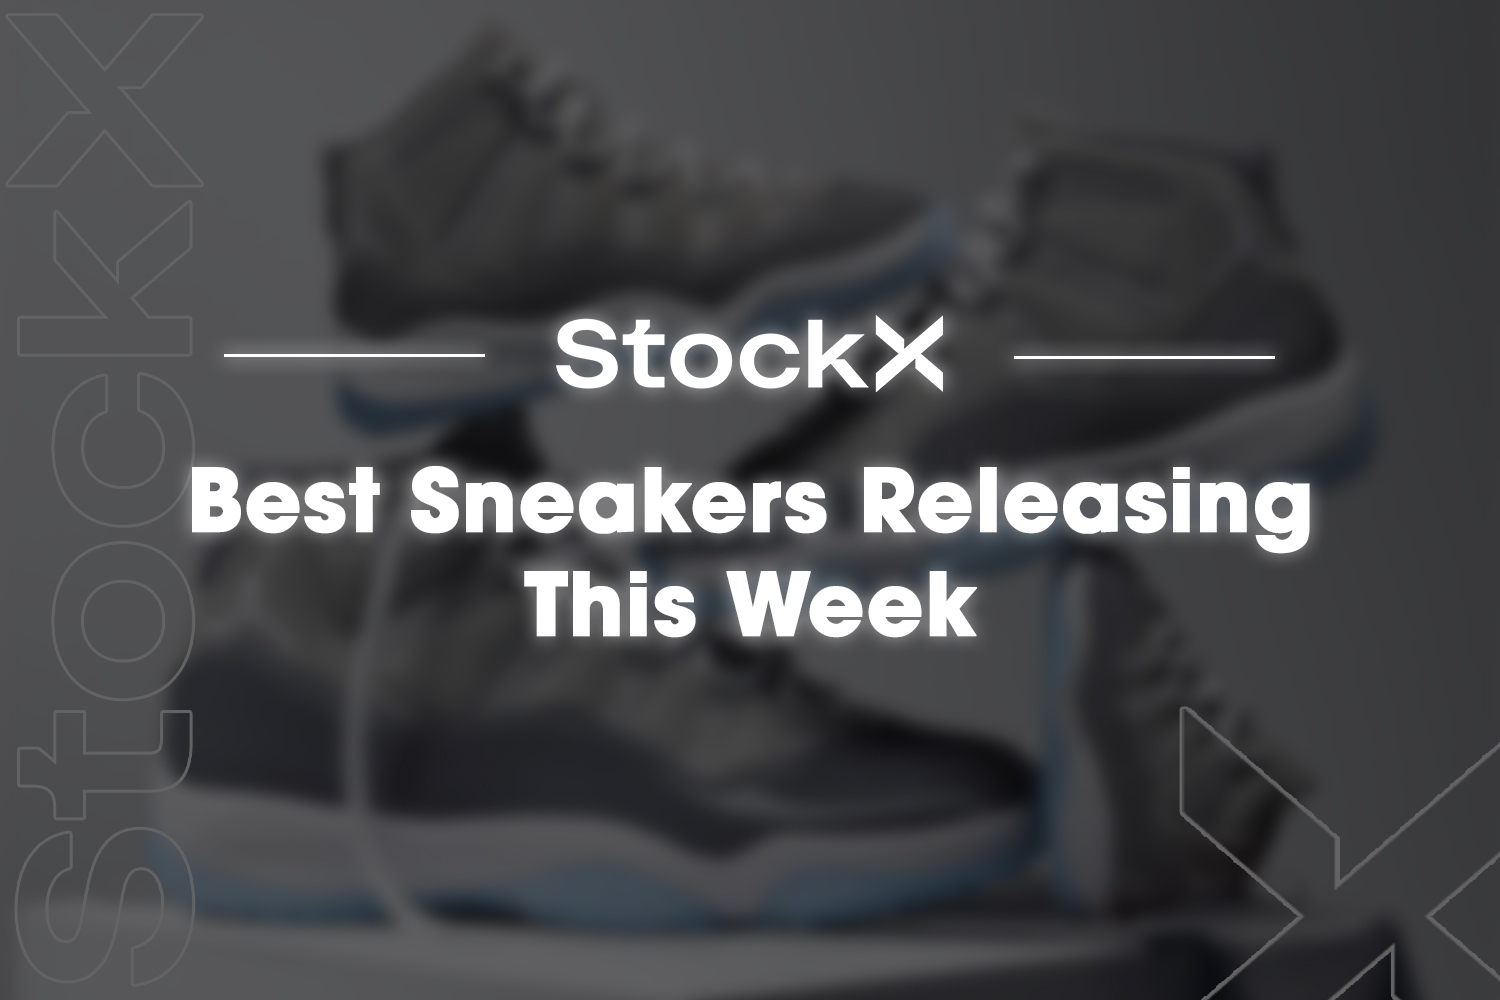 The most popular sneakers on StockX in week 51